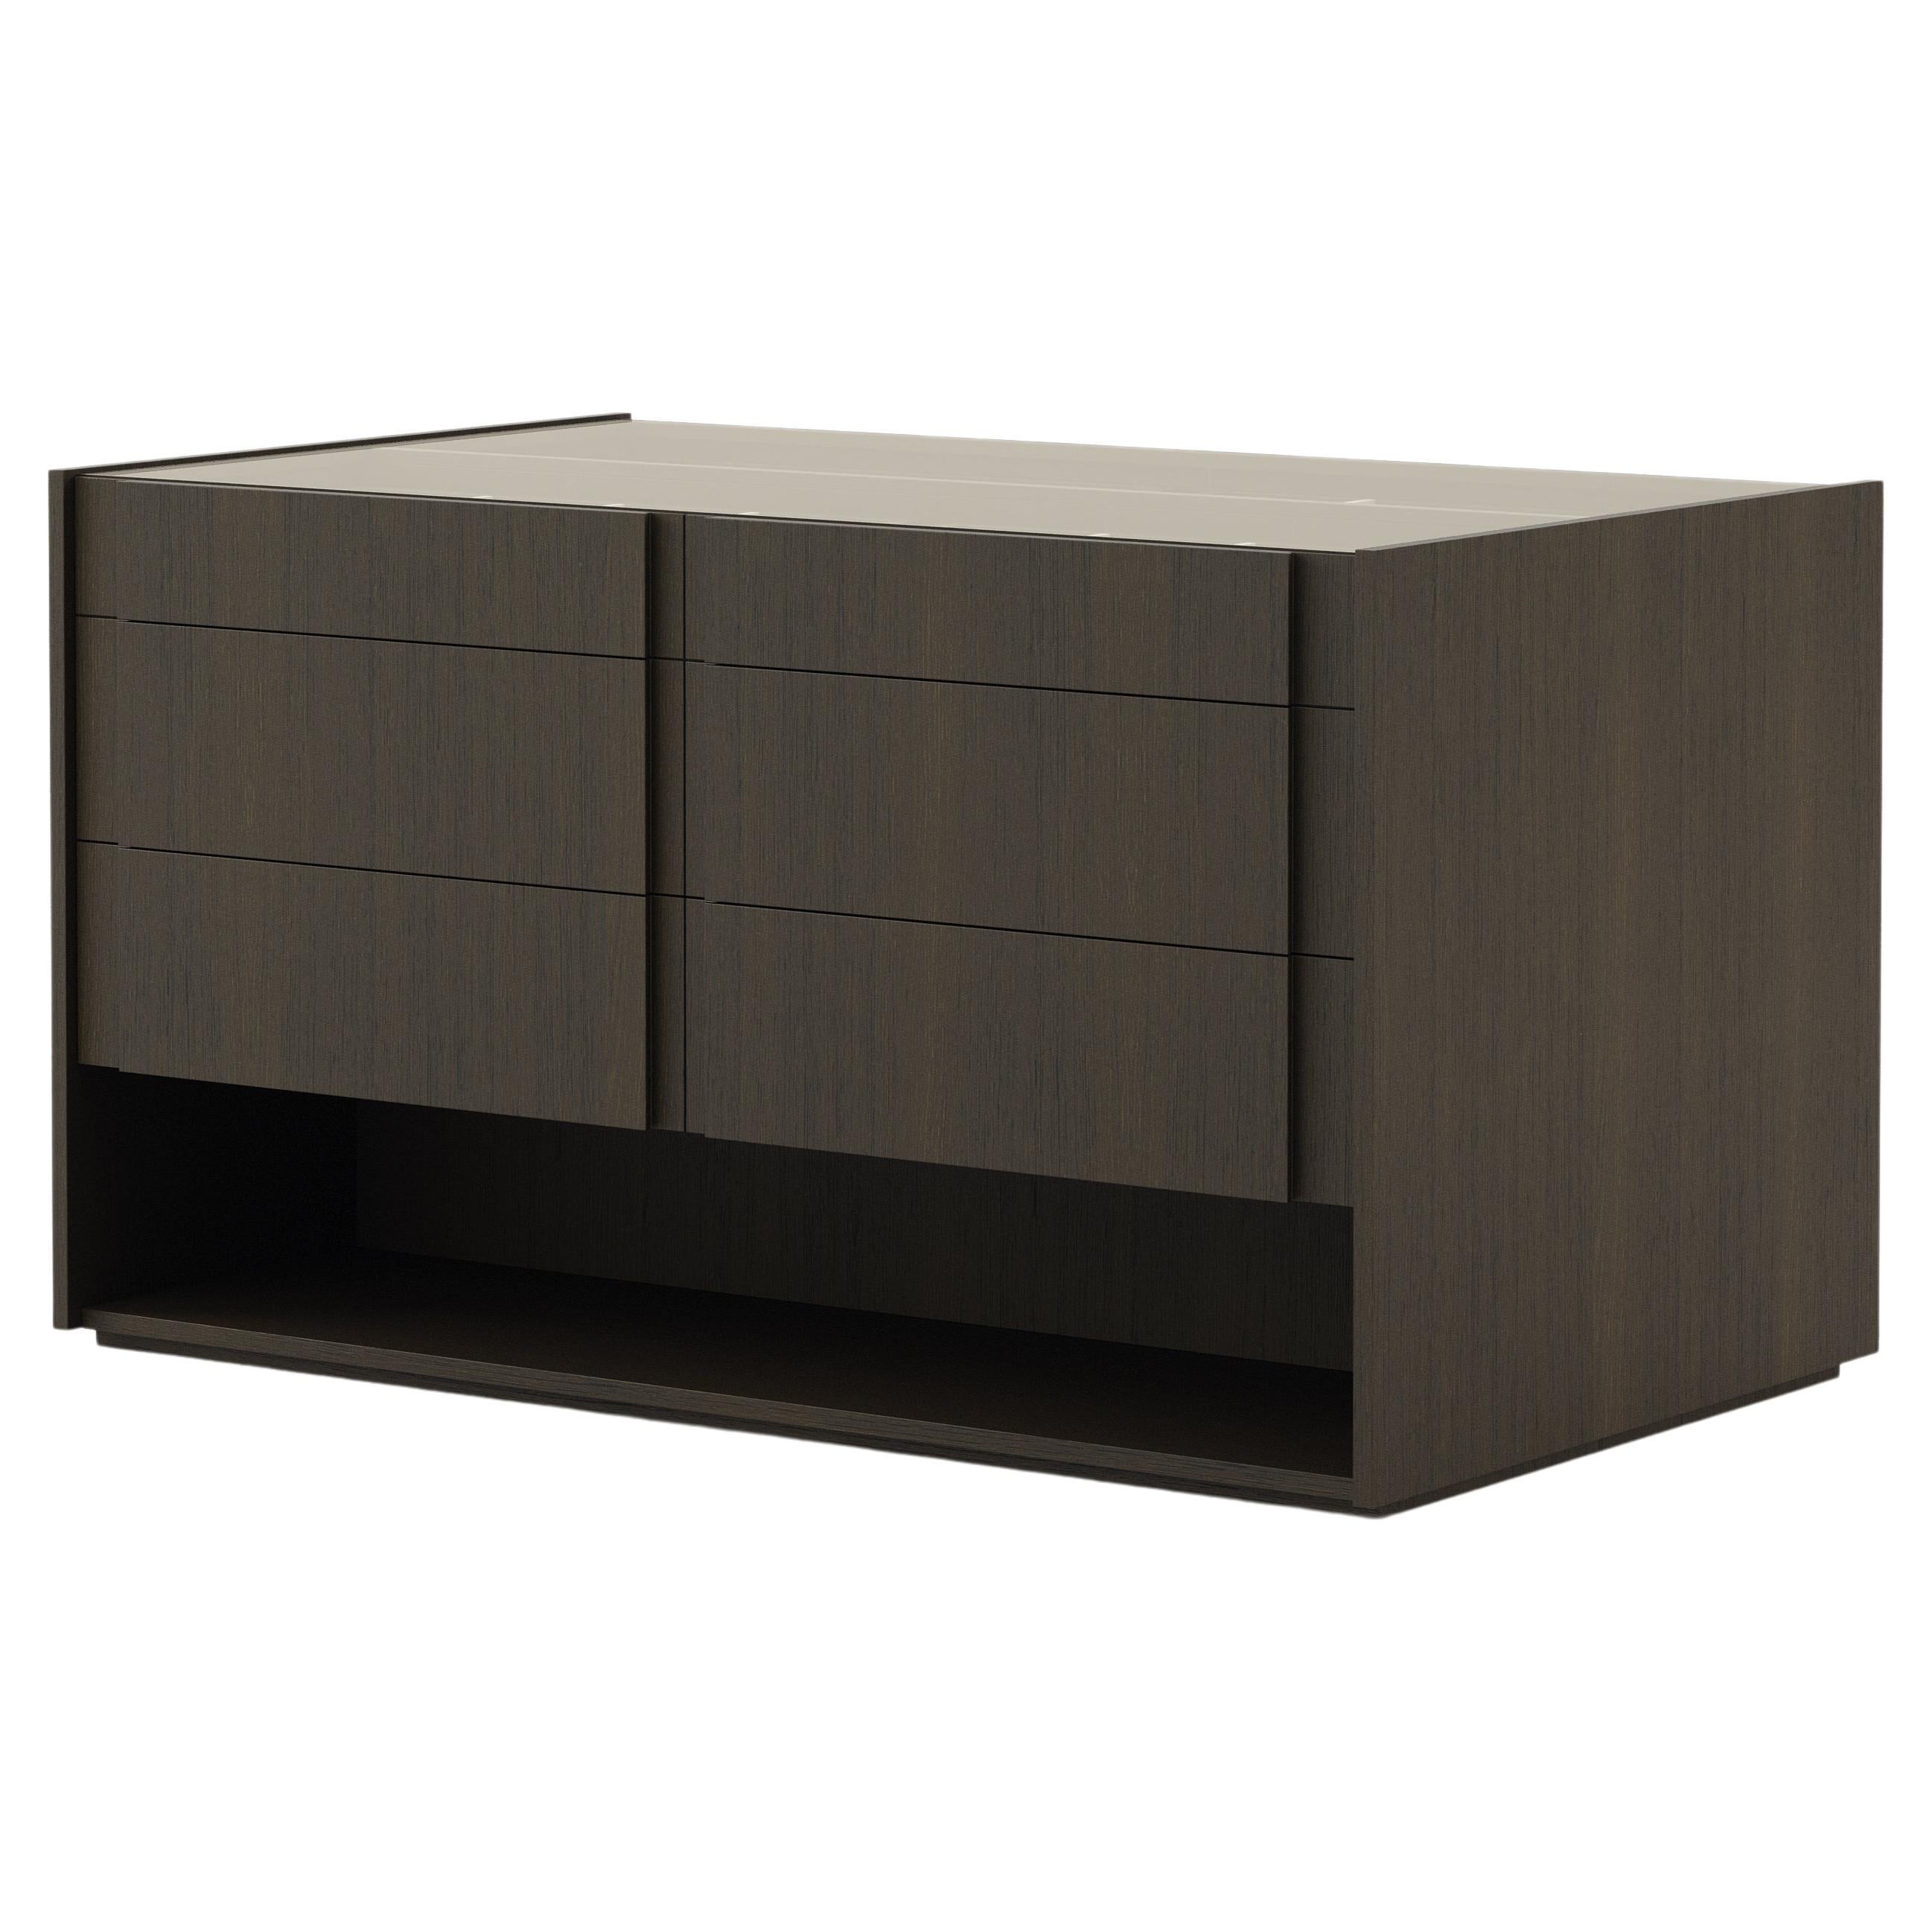 Modern Sevilha Island Chest of Drawers Made with Oak, Glass and Suede Details